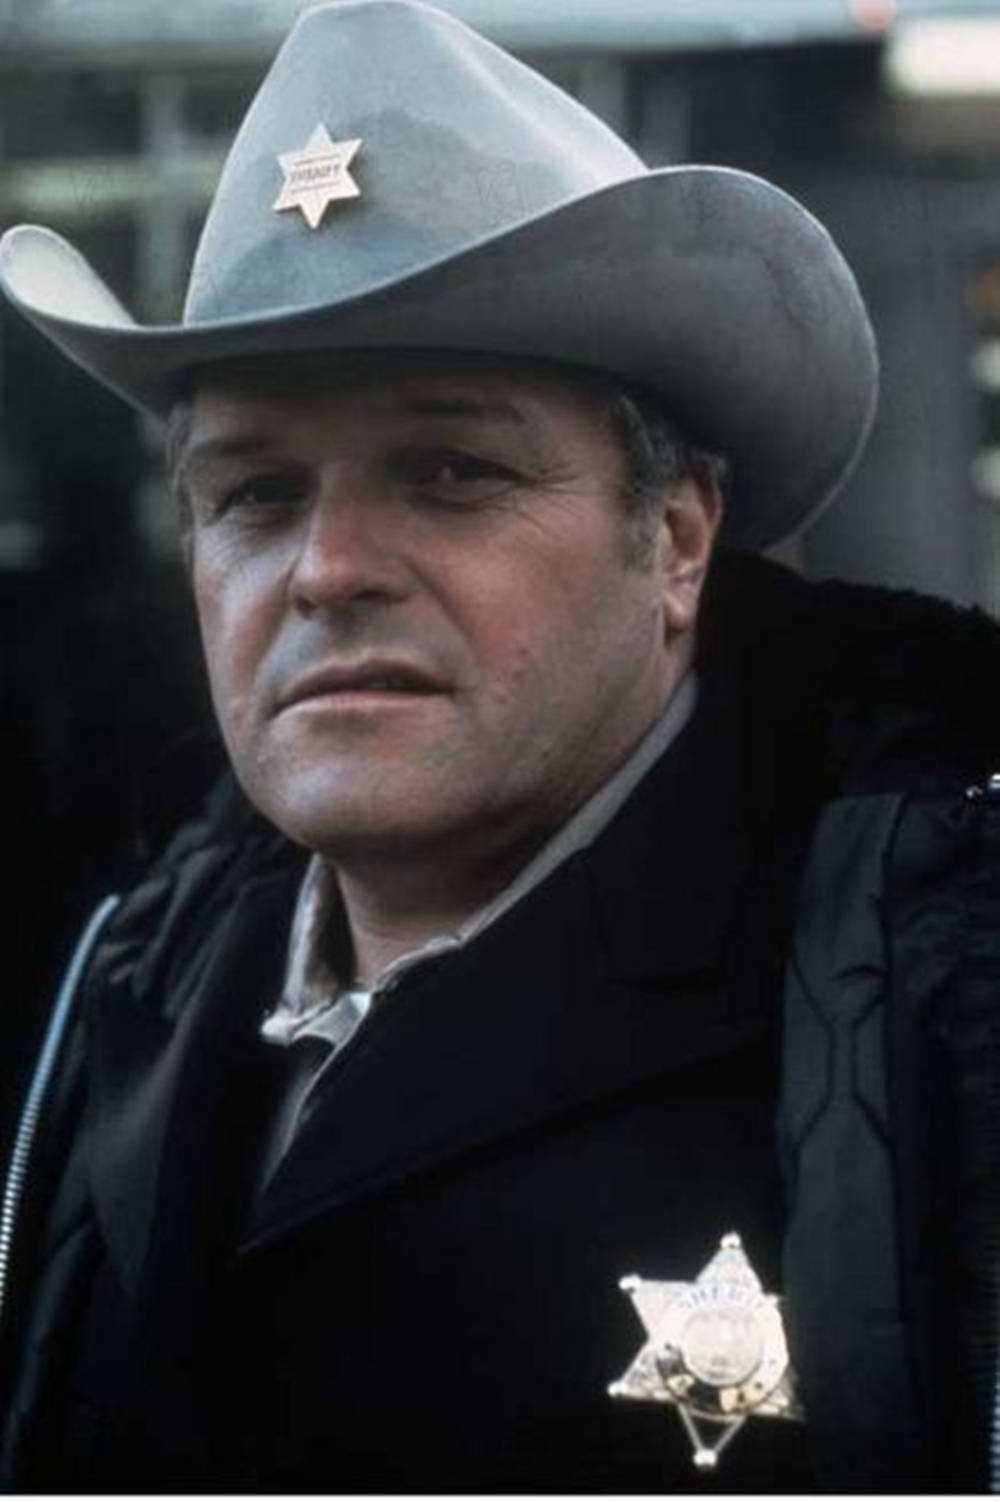 Brian Dennehy In Cowboy Costume Wallpaper